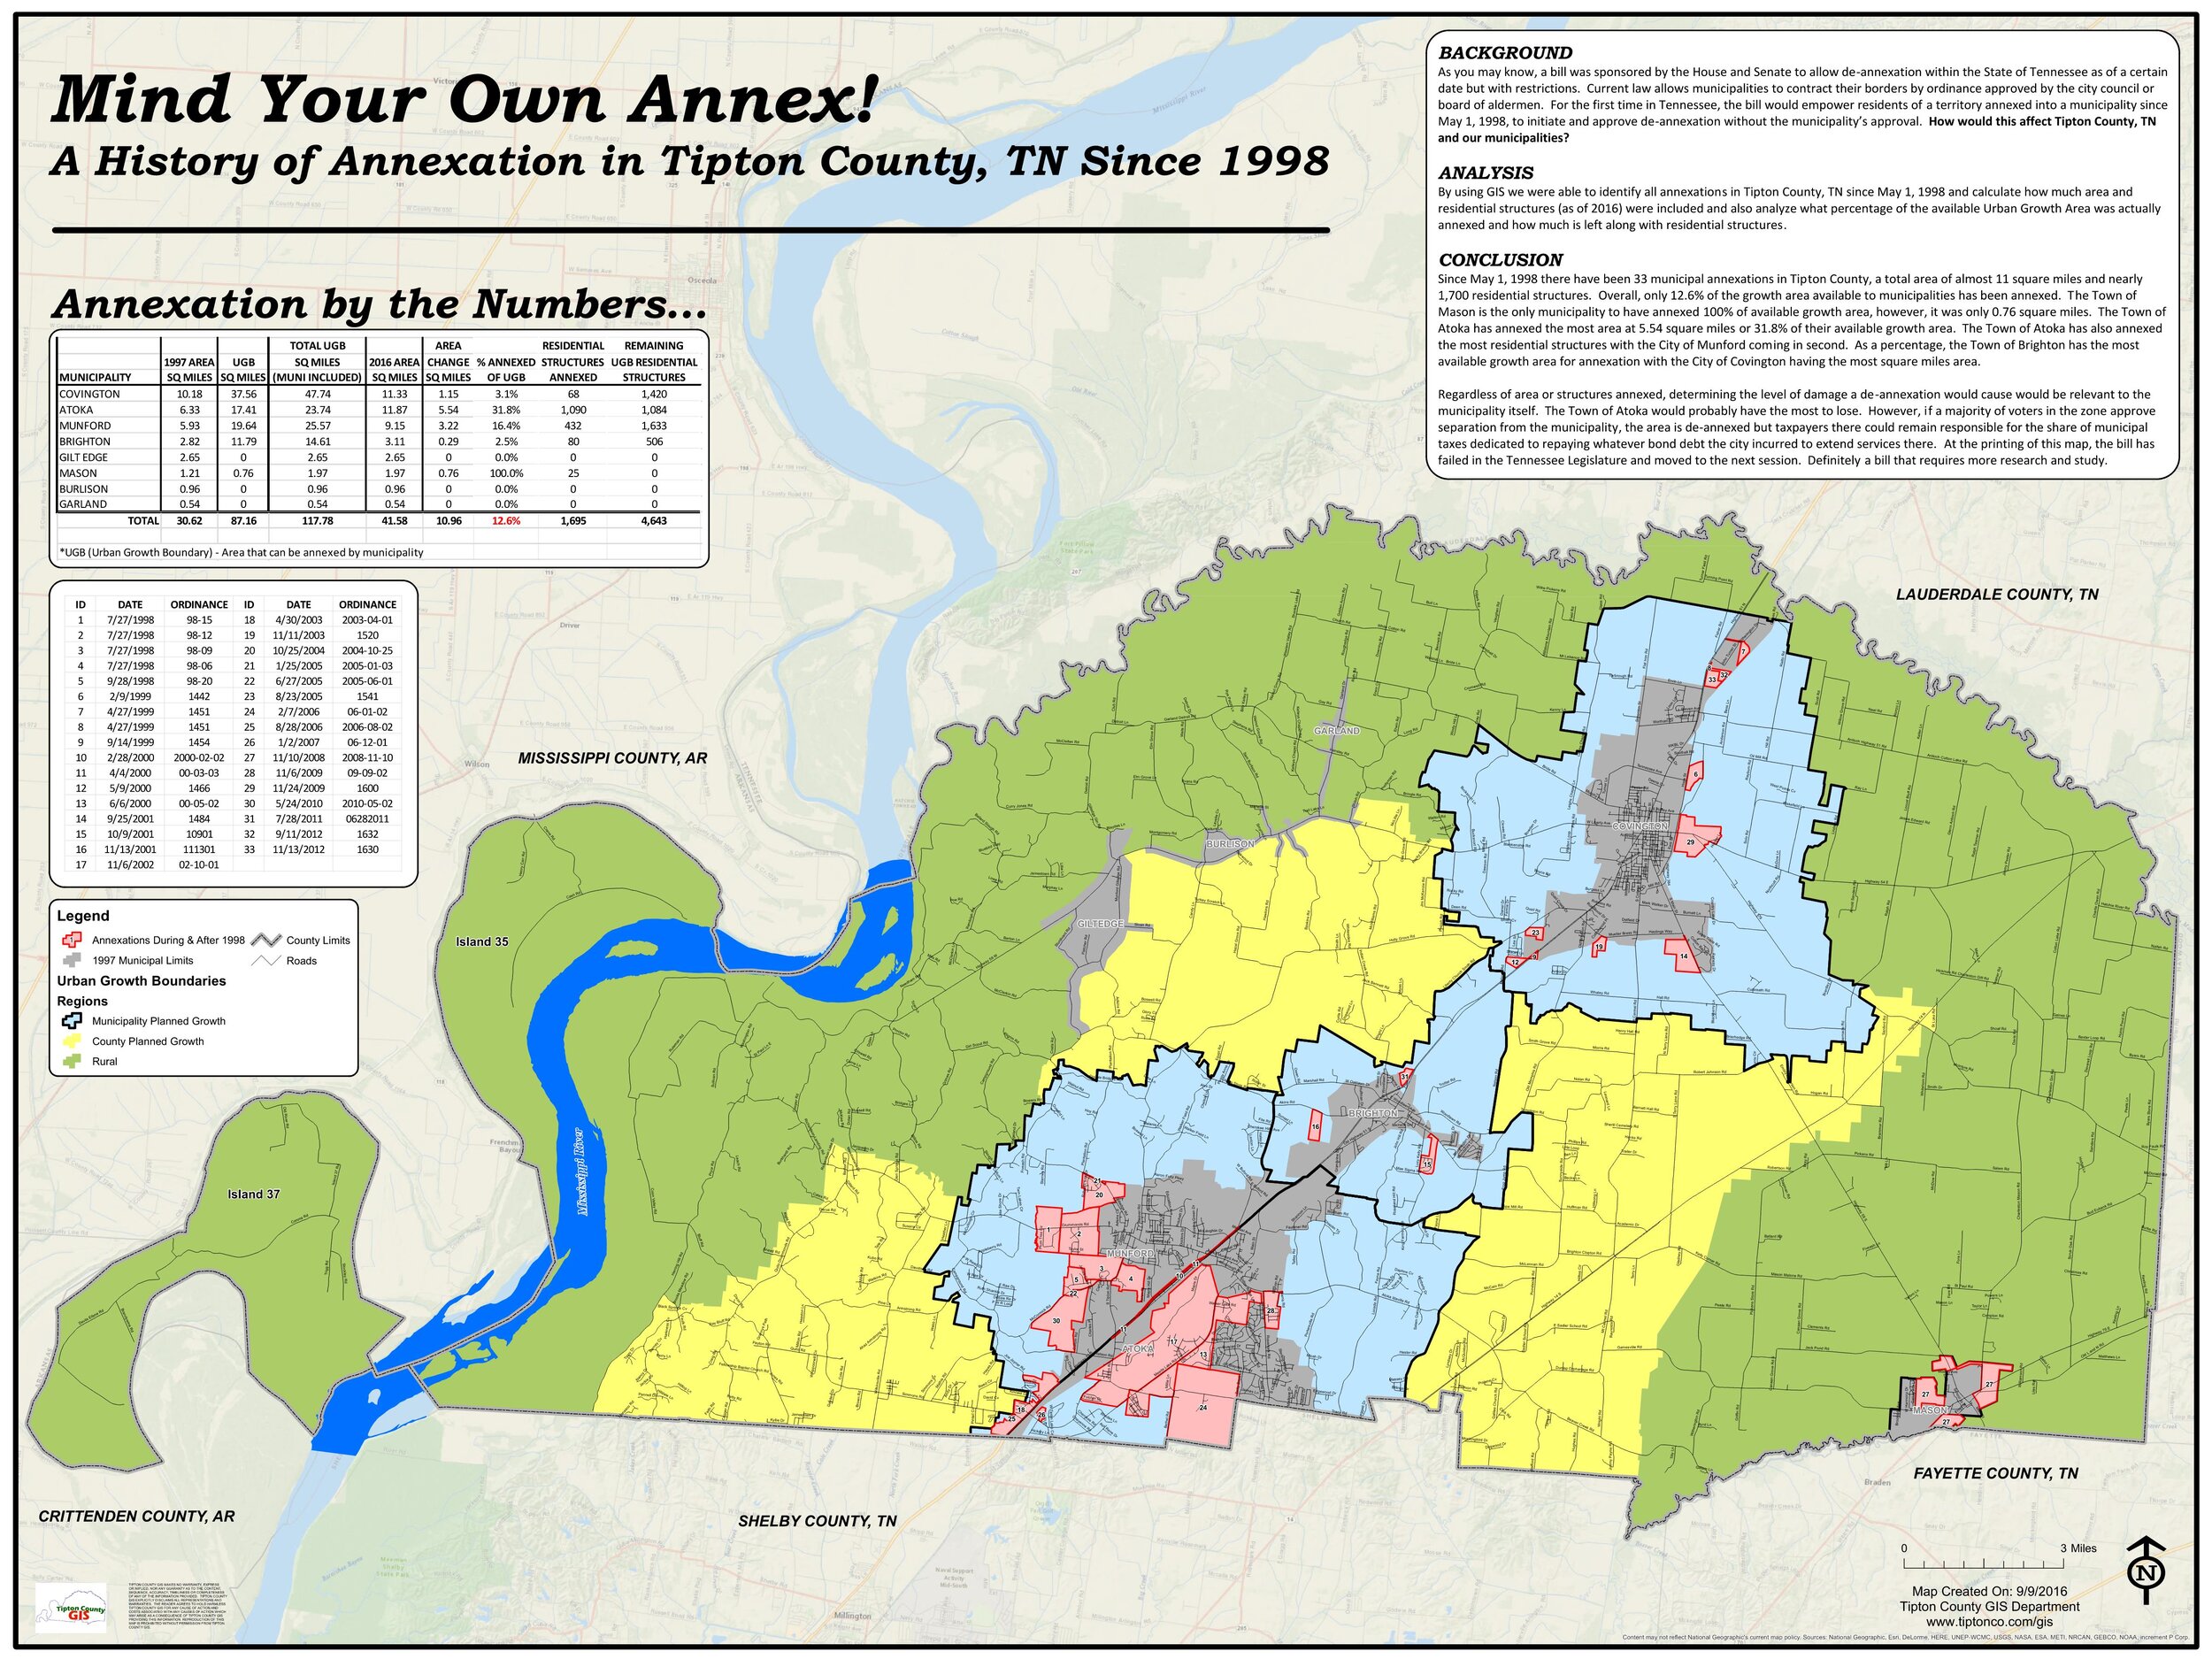 Mind Your Own Annex! A History of Annexation in Tipton County, TN Since 1998